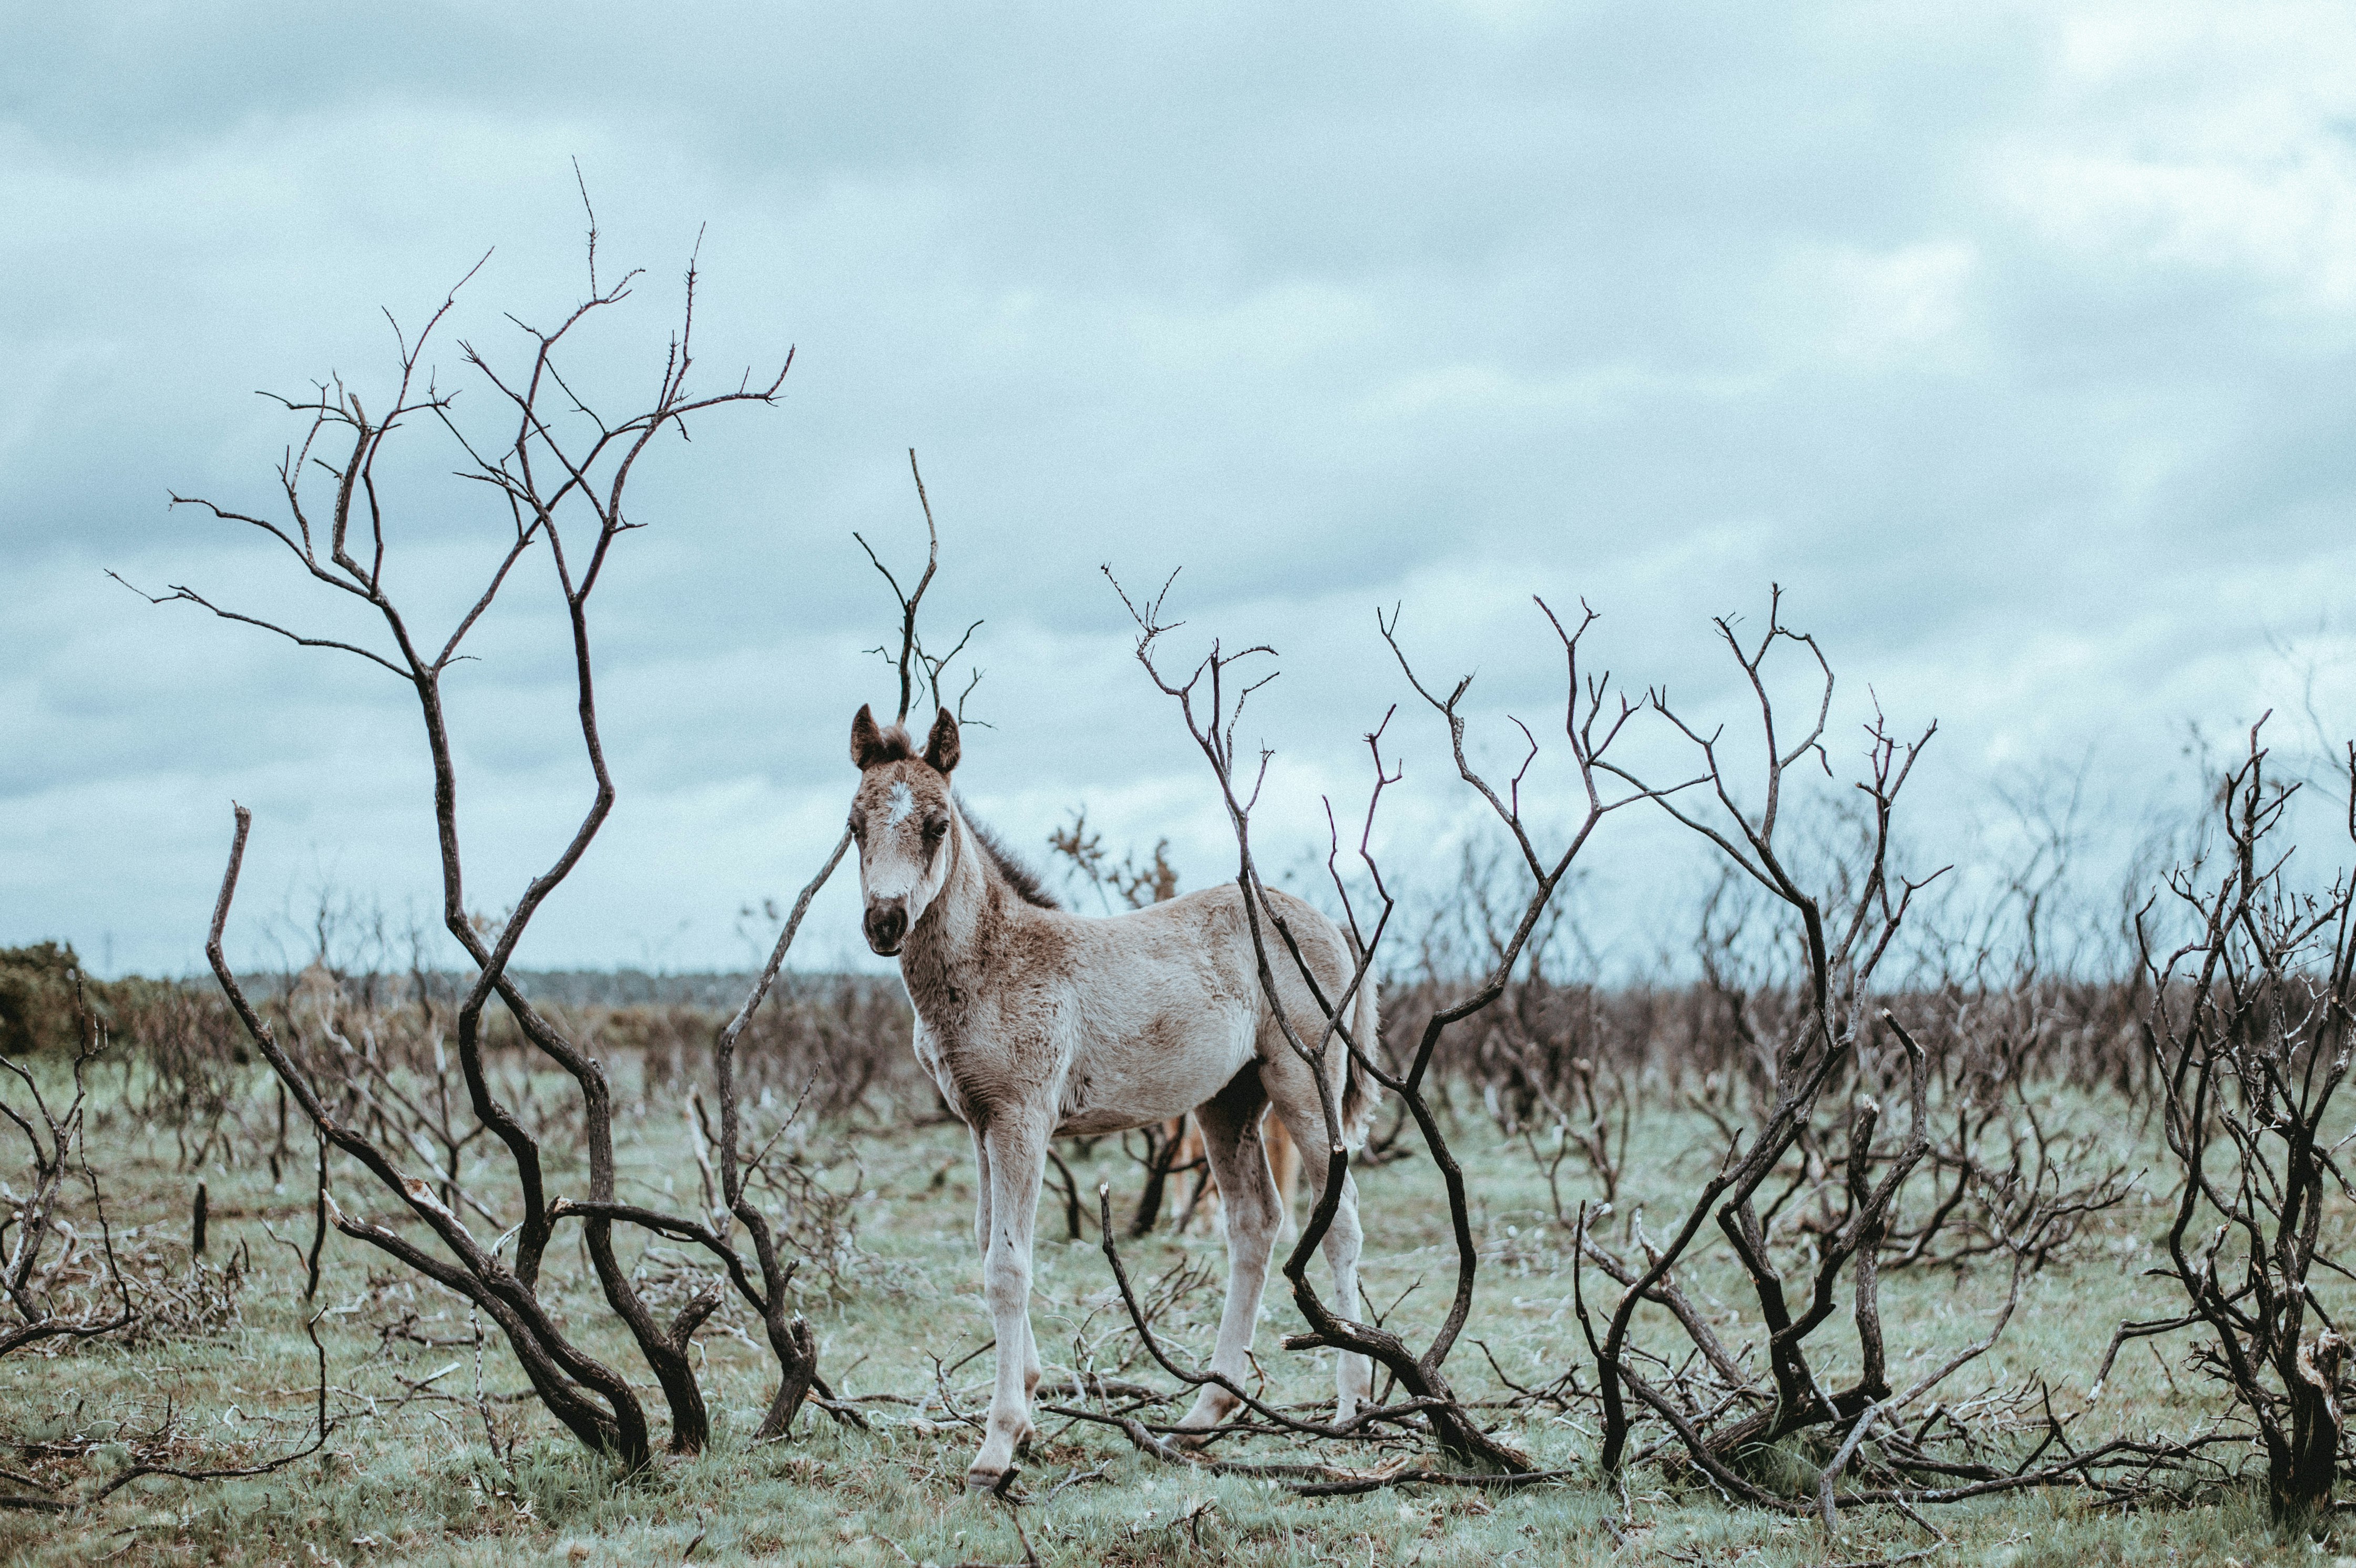 white and brown horse walking in the leafless bush